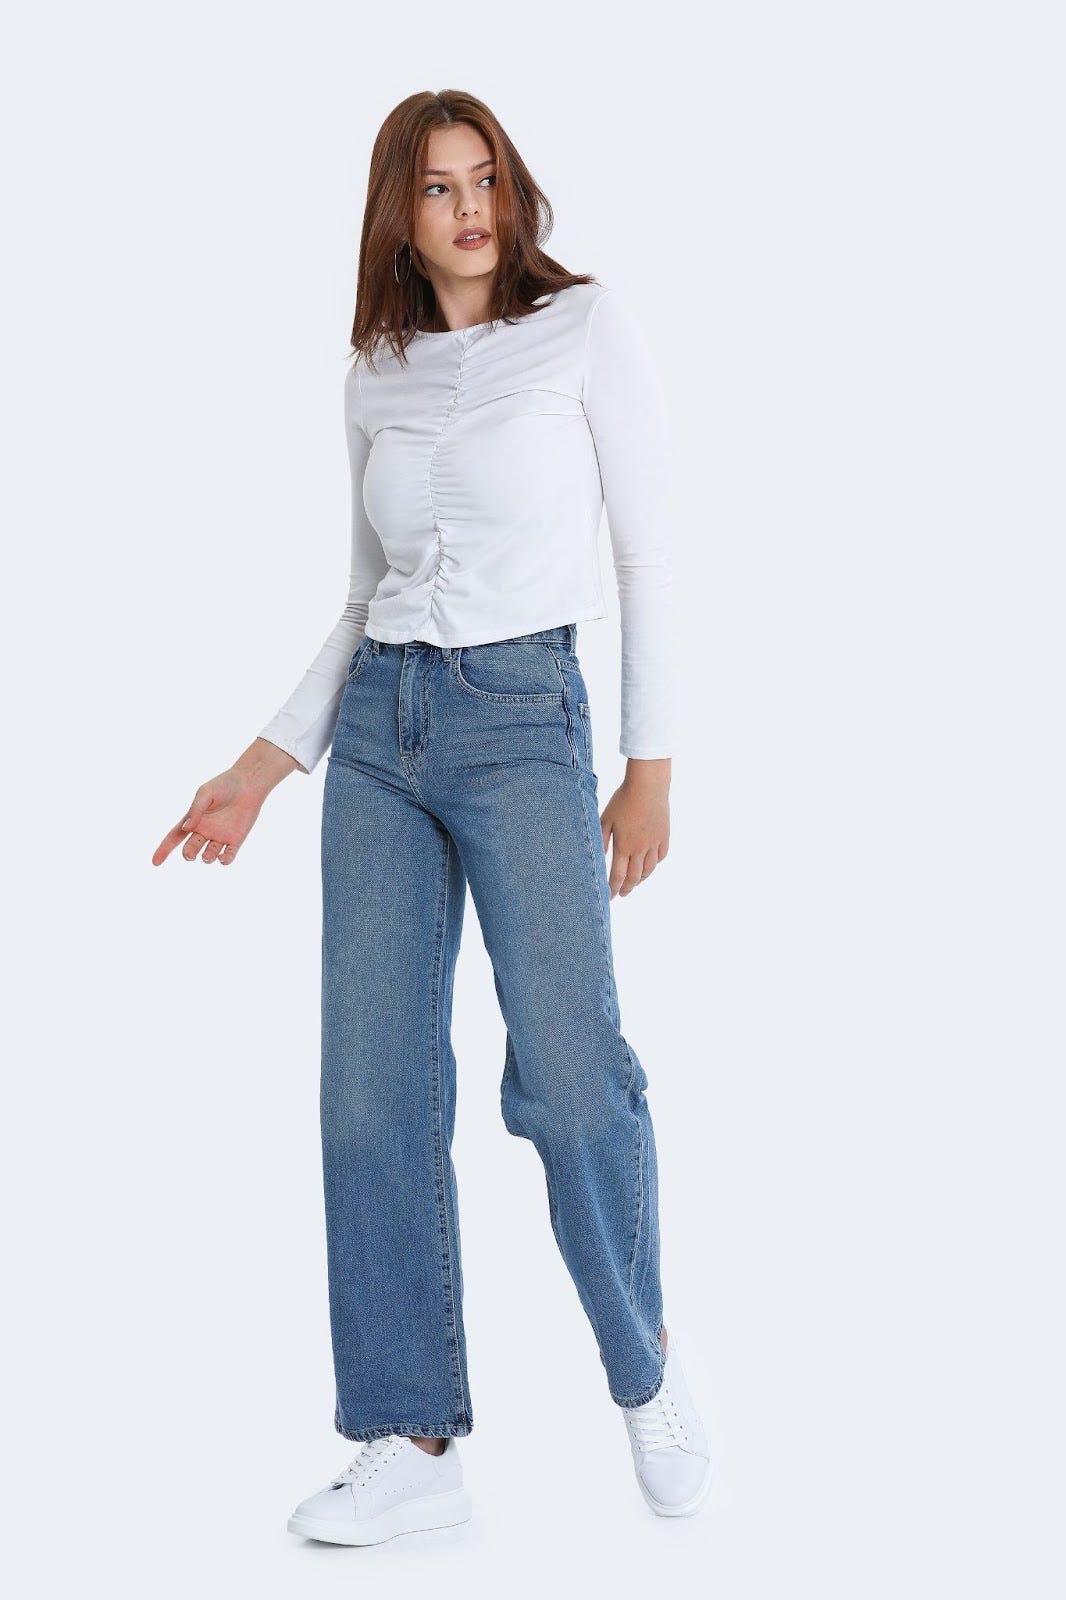 How can I make my thick thighs look thinner in jeans?, by WomenDresses